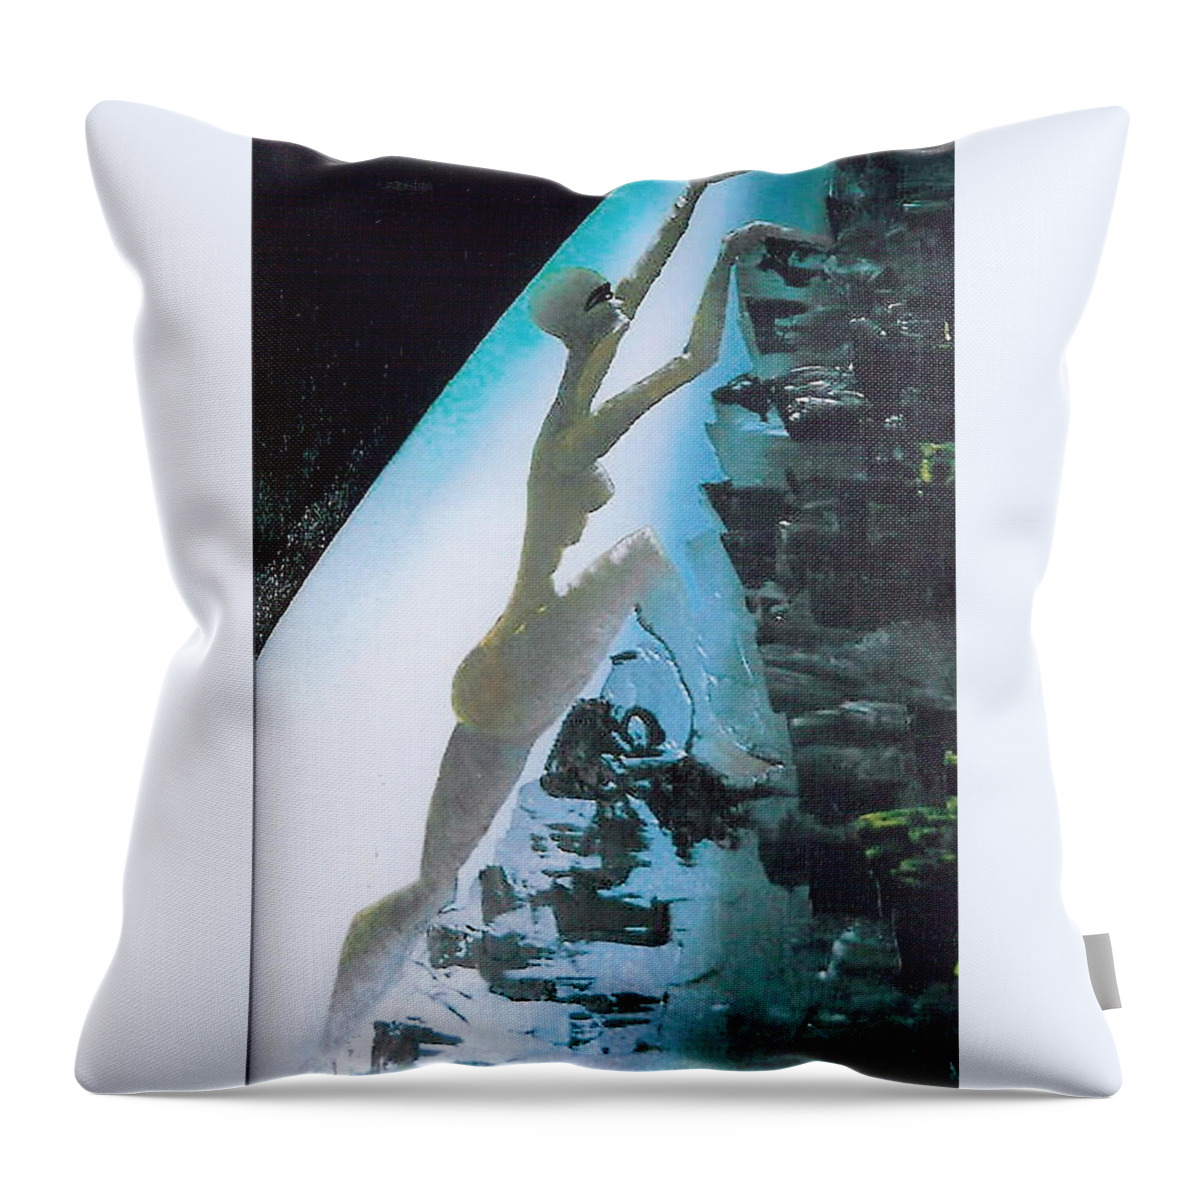  Throw Pillow featuring the painting Striving by Lorena Fernandez